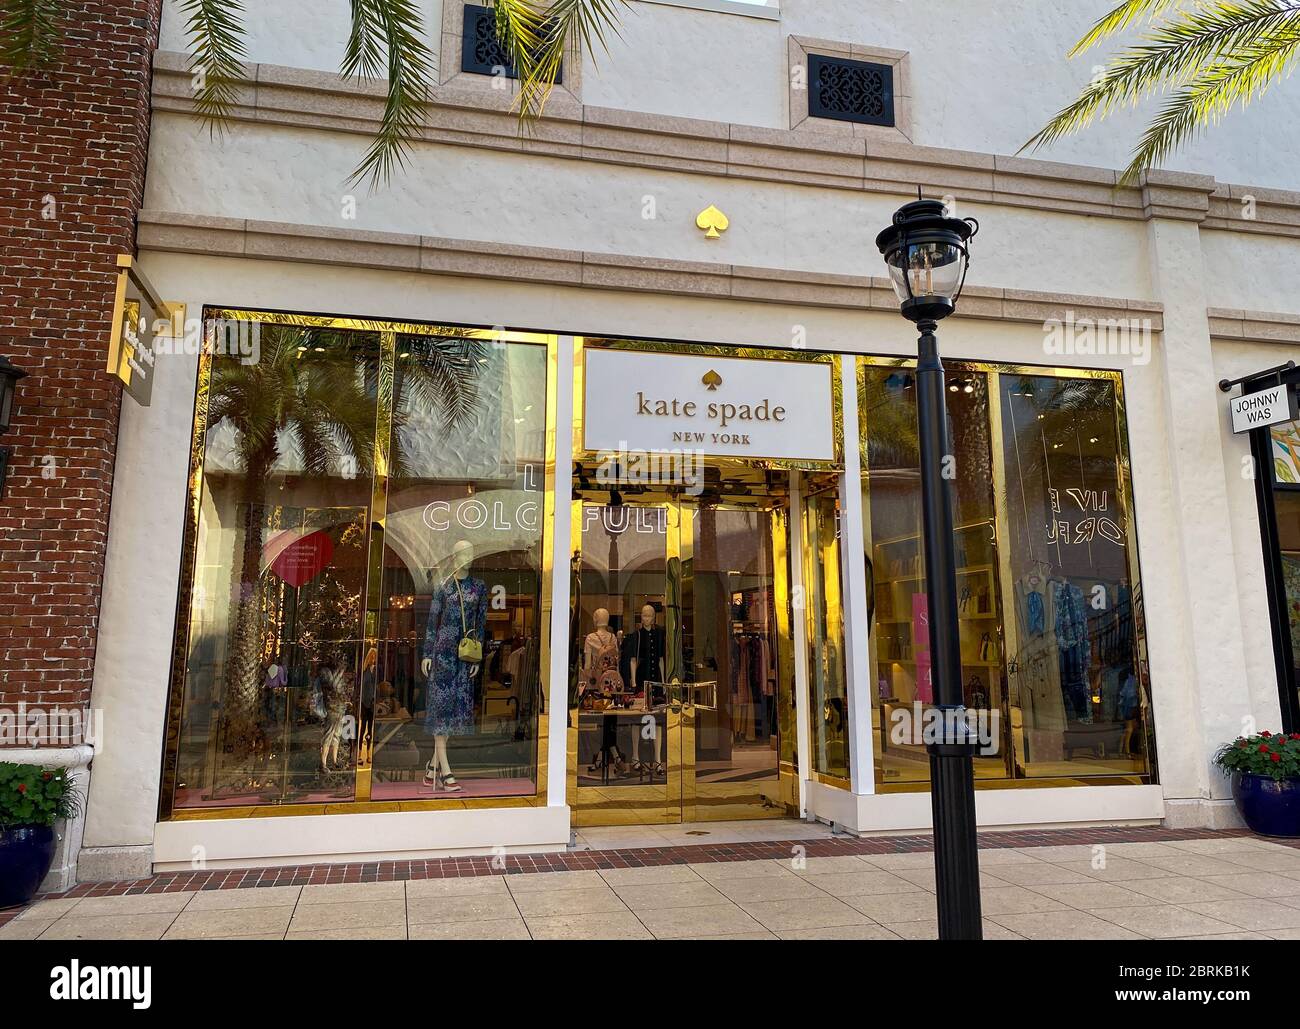 Orlando, FL/USA-2/13/20: A Kate Spade retail store in an outdoor mall in  Orlando, FL Stock Photo - Alamy